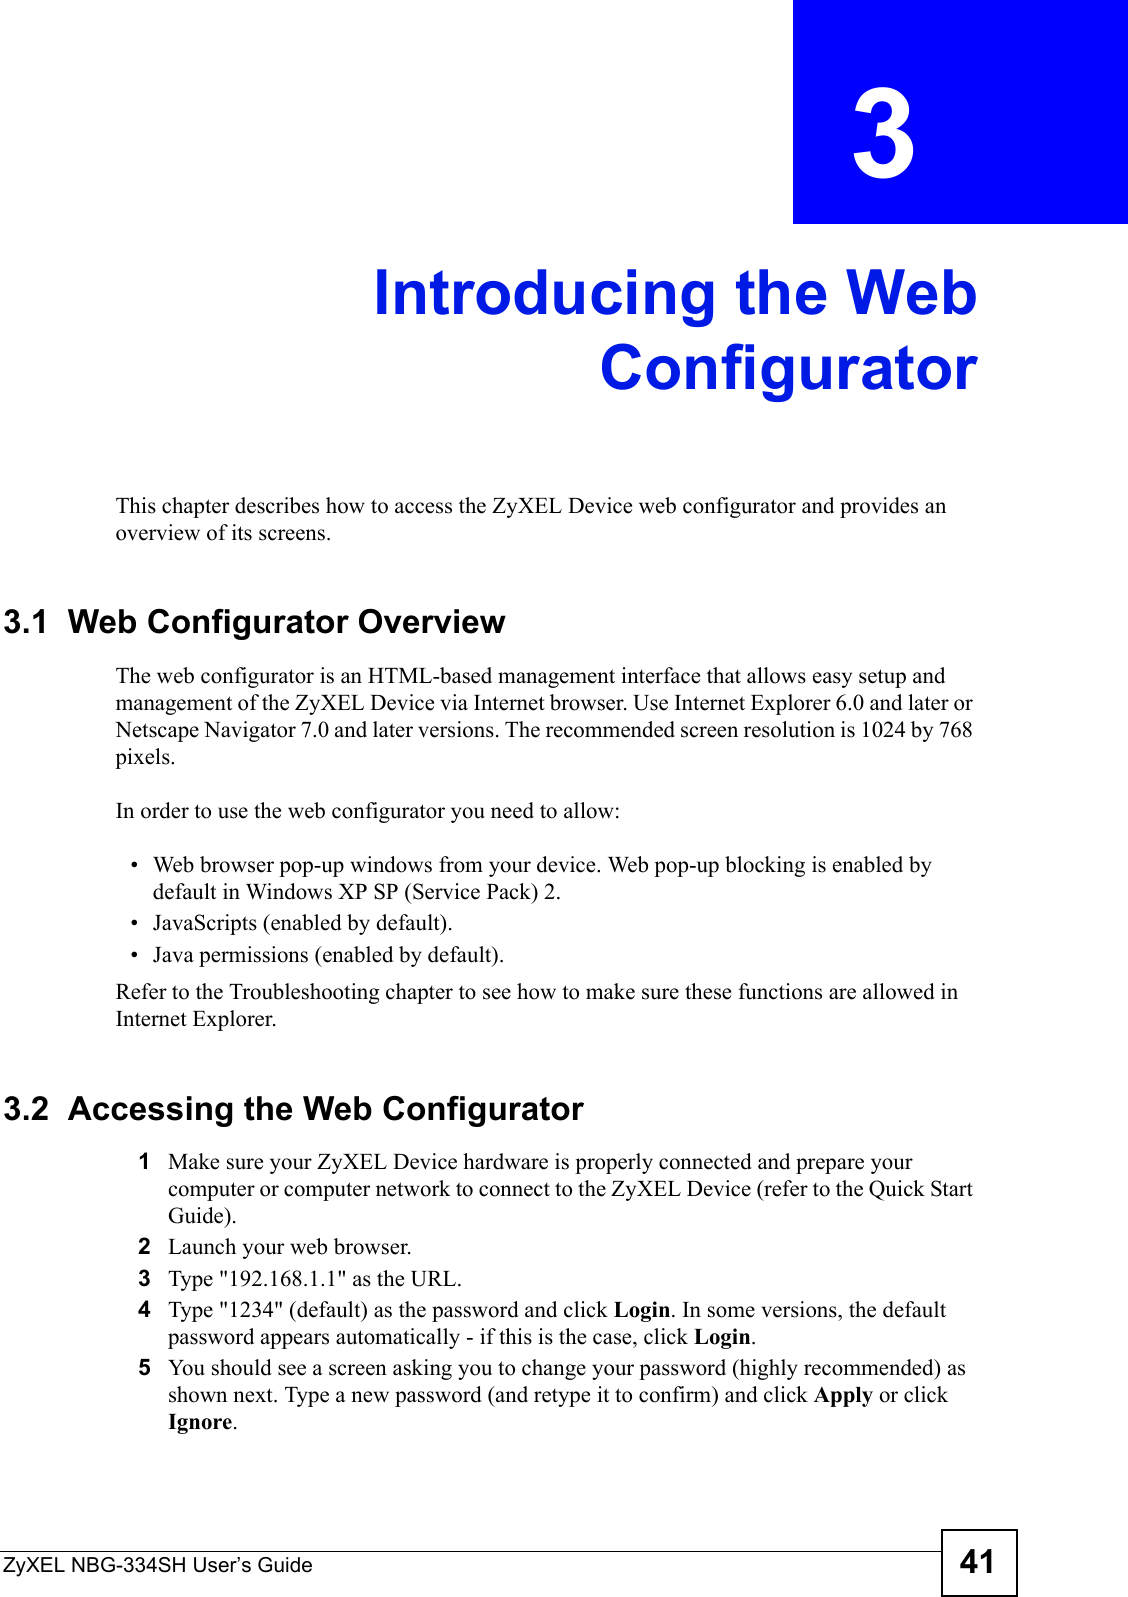 ZyXEL NBG-334SH User’s Guide 41CHAPTER  3 Introducing the WebConfiguratorThis chapter describes how to access the ZyXEL Device web configurator and provides an overview of its screens.3.1  Web Configurator OverviewThe web configurator is an HTML-based management interface that allows easy setup and management of the ZyXEL Device via Internet browser. Use Internet Explorer 6.0 and later or Netscape Navigator 7.0 and later versions. The recommended screen resolution is 1024 by 768 pixels.In order to use the web configurator you need to allow:• Web browser pop-up windows from your device. Web pop-up blocking is enabled by default in Windows XP SP (Service Pack) 2.• JavaScripts (enabled by default).• Java permissions (enabled by default).Refer to the Troubleshooting chapter to see how to make sure these functions are allowed in Internet Explorer.3.2  Accessing the Web Configurator1Make sure your ZyXEL Device hardware is properly connected and prepare your computer or computer network to connect to the ZyXEL Device (refer to the Quick Start Guide).2Launch your web browser.3Type &quot;192.168.1.1&quot; as the URL.4Type &quot;1234&quot; (default) as the password and click Login. In some versions, the default password appears automatically - if this is the case, click Login.5You should see a screen asking you to change your password (highly recommended) as shown next. Type a new password (and retype it to confirm) and click Apply or click Ignore.